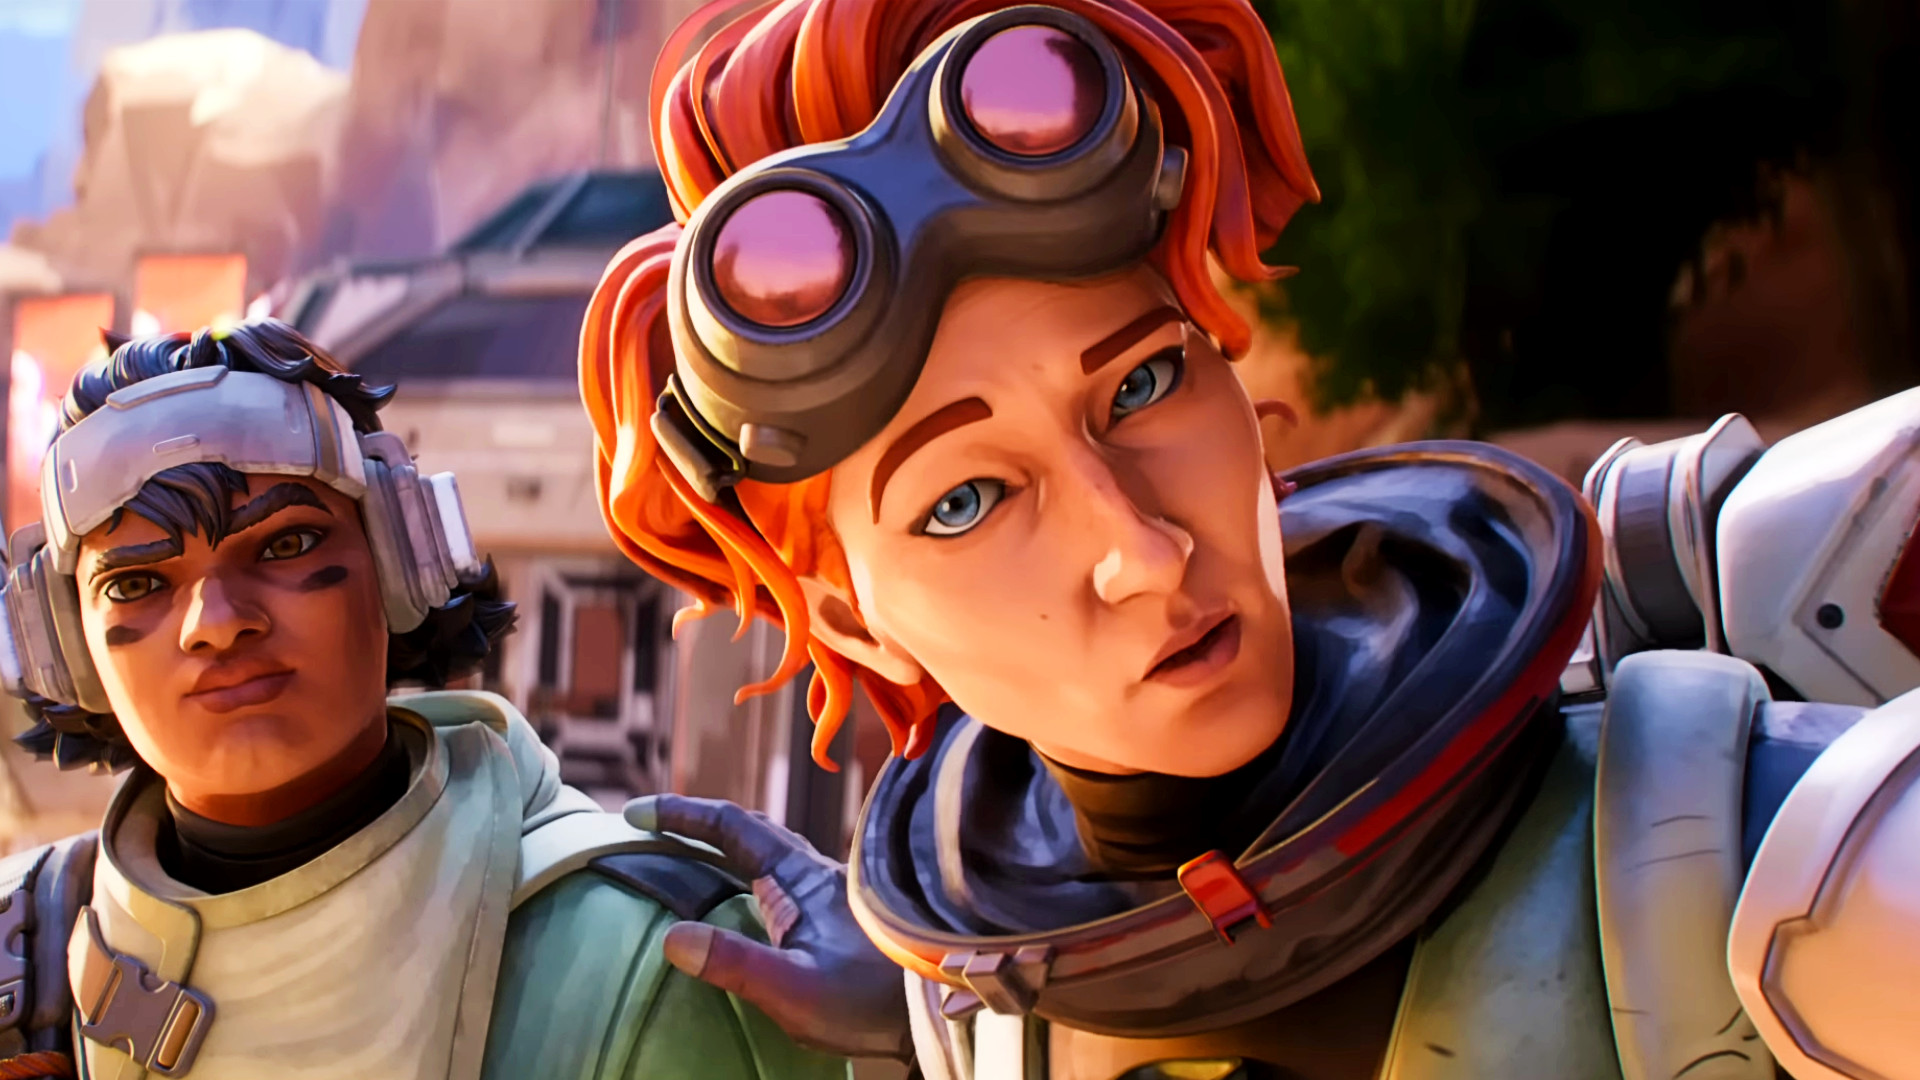 Apex Legends player count in August its highest yet on Steam